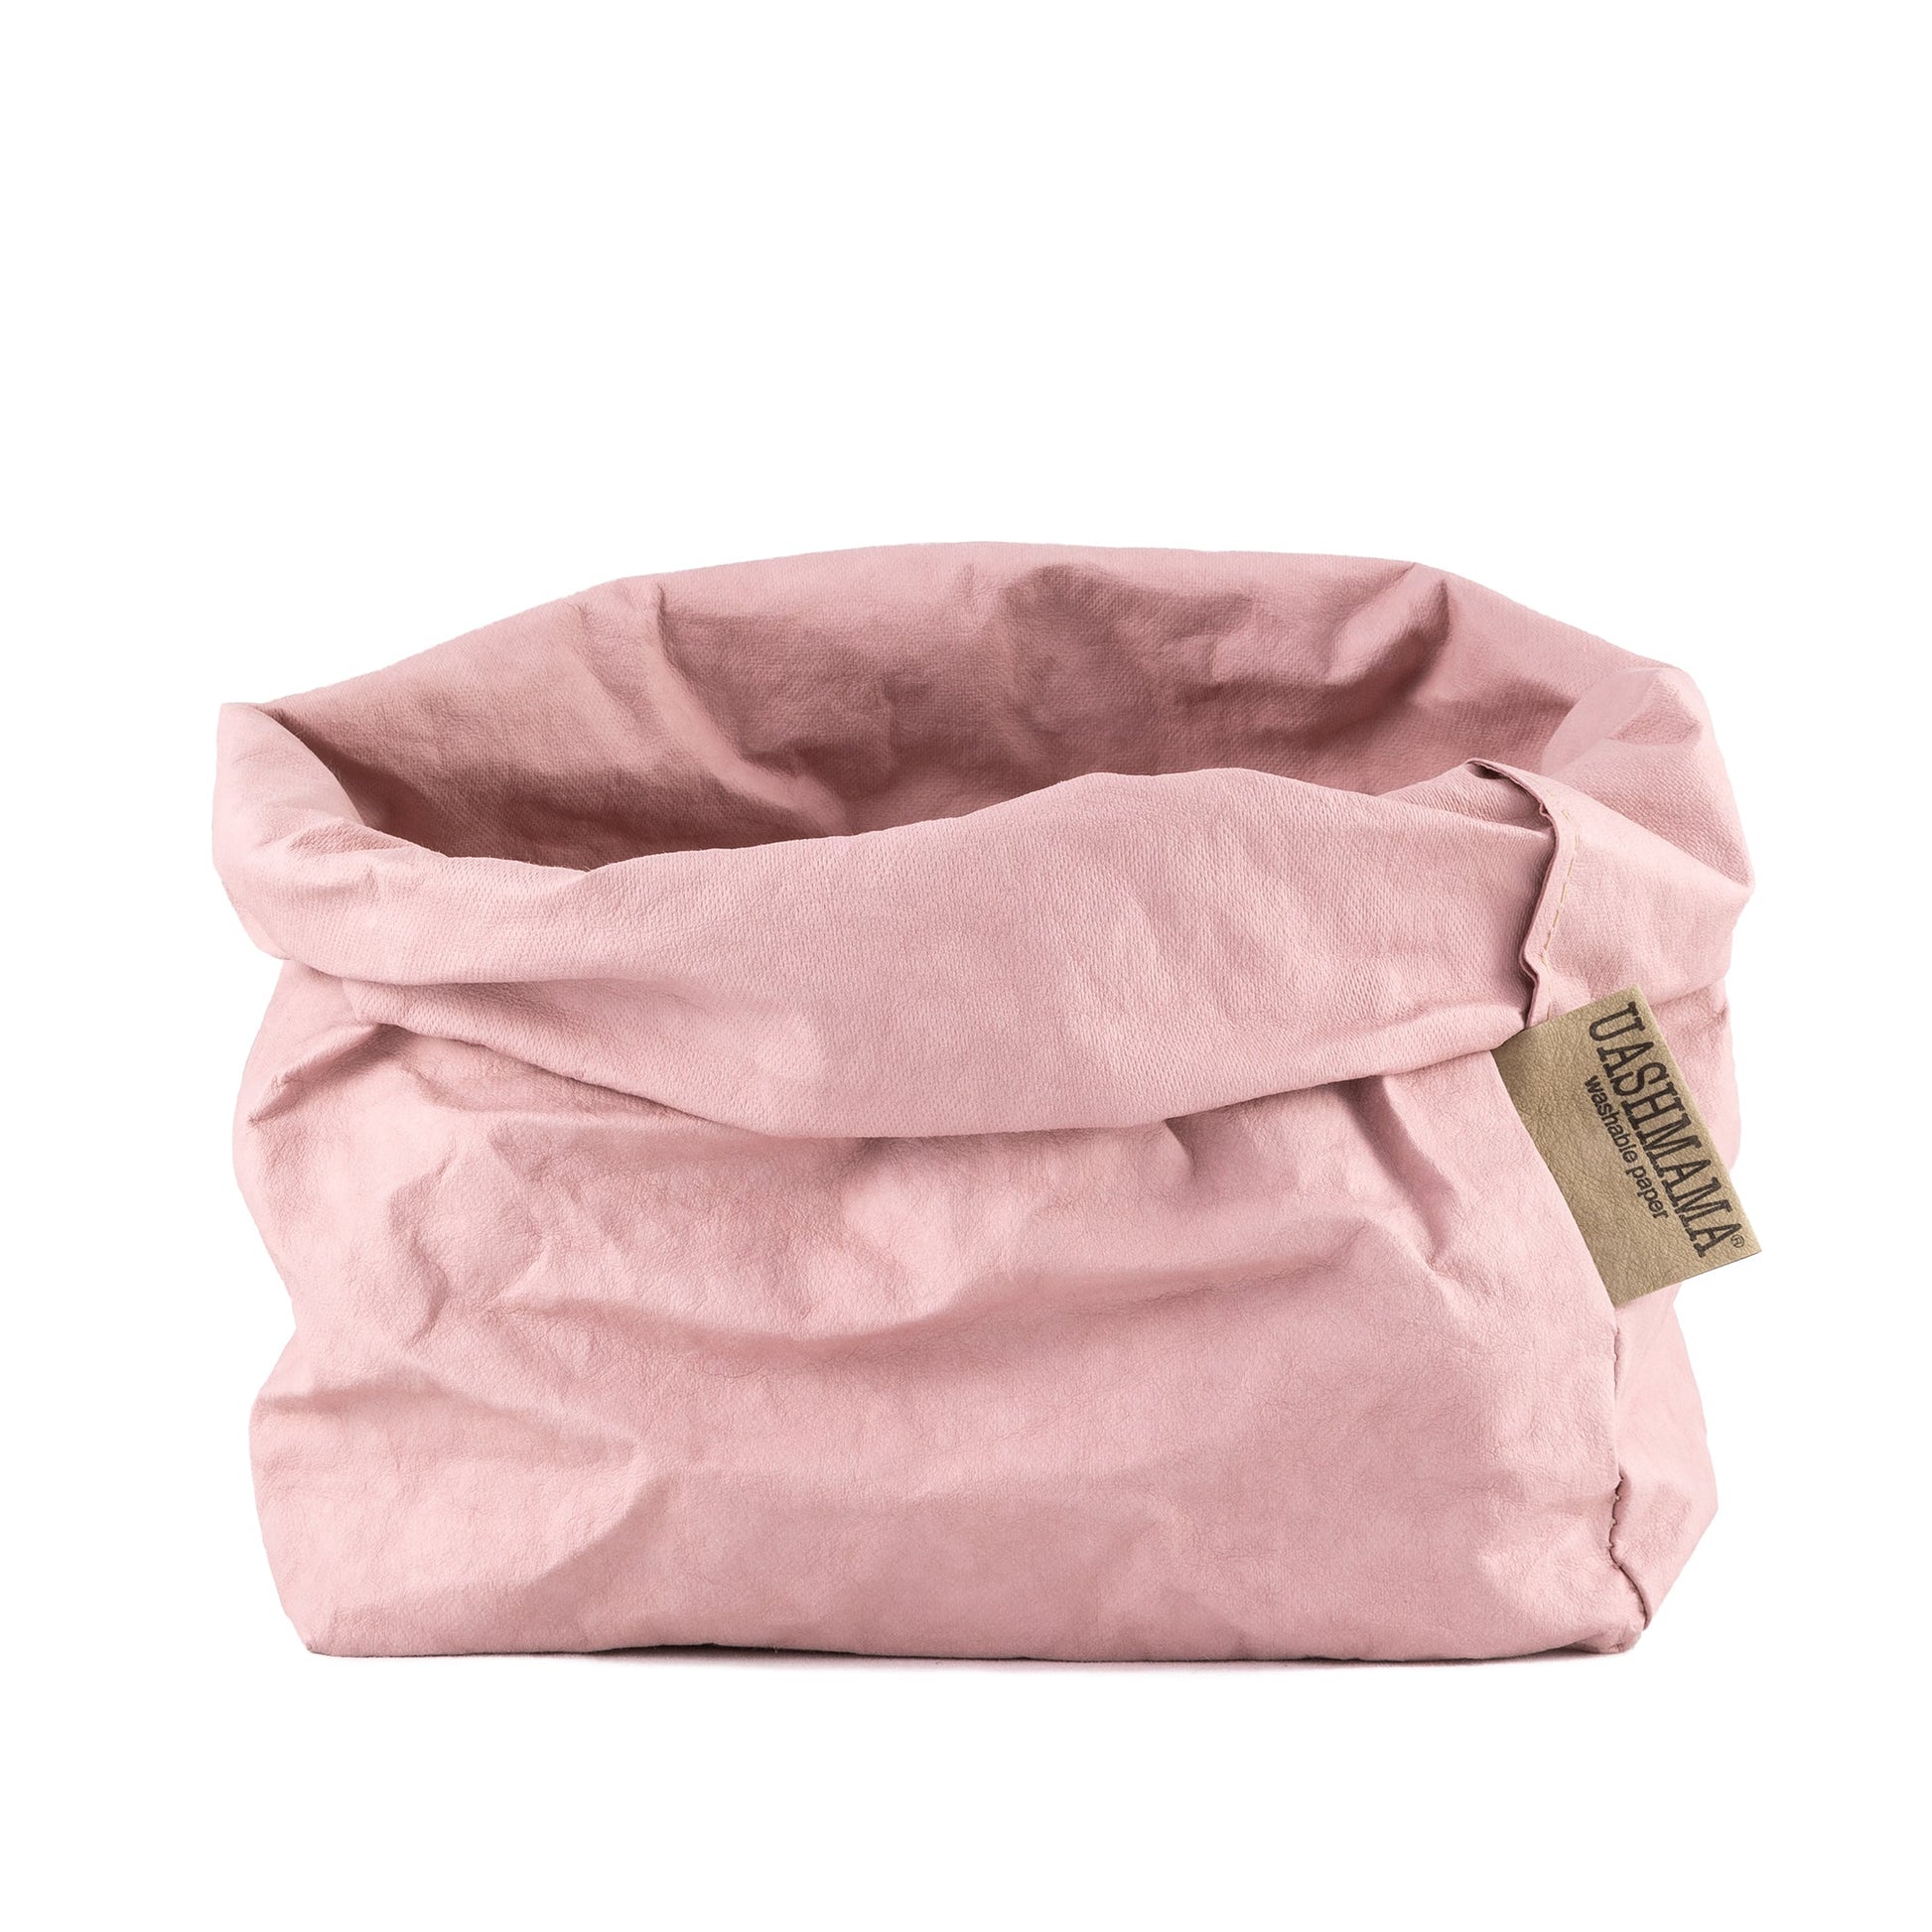 A washable paper bag is shown. The bag is rolled down at the top and features a UASHMAMA logo label on the bottom left corner. The bag pictured is the large size in pale pink.